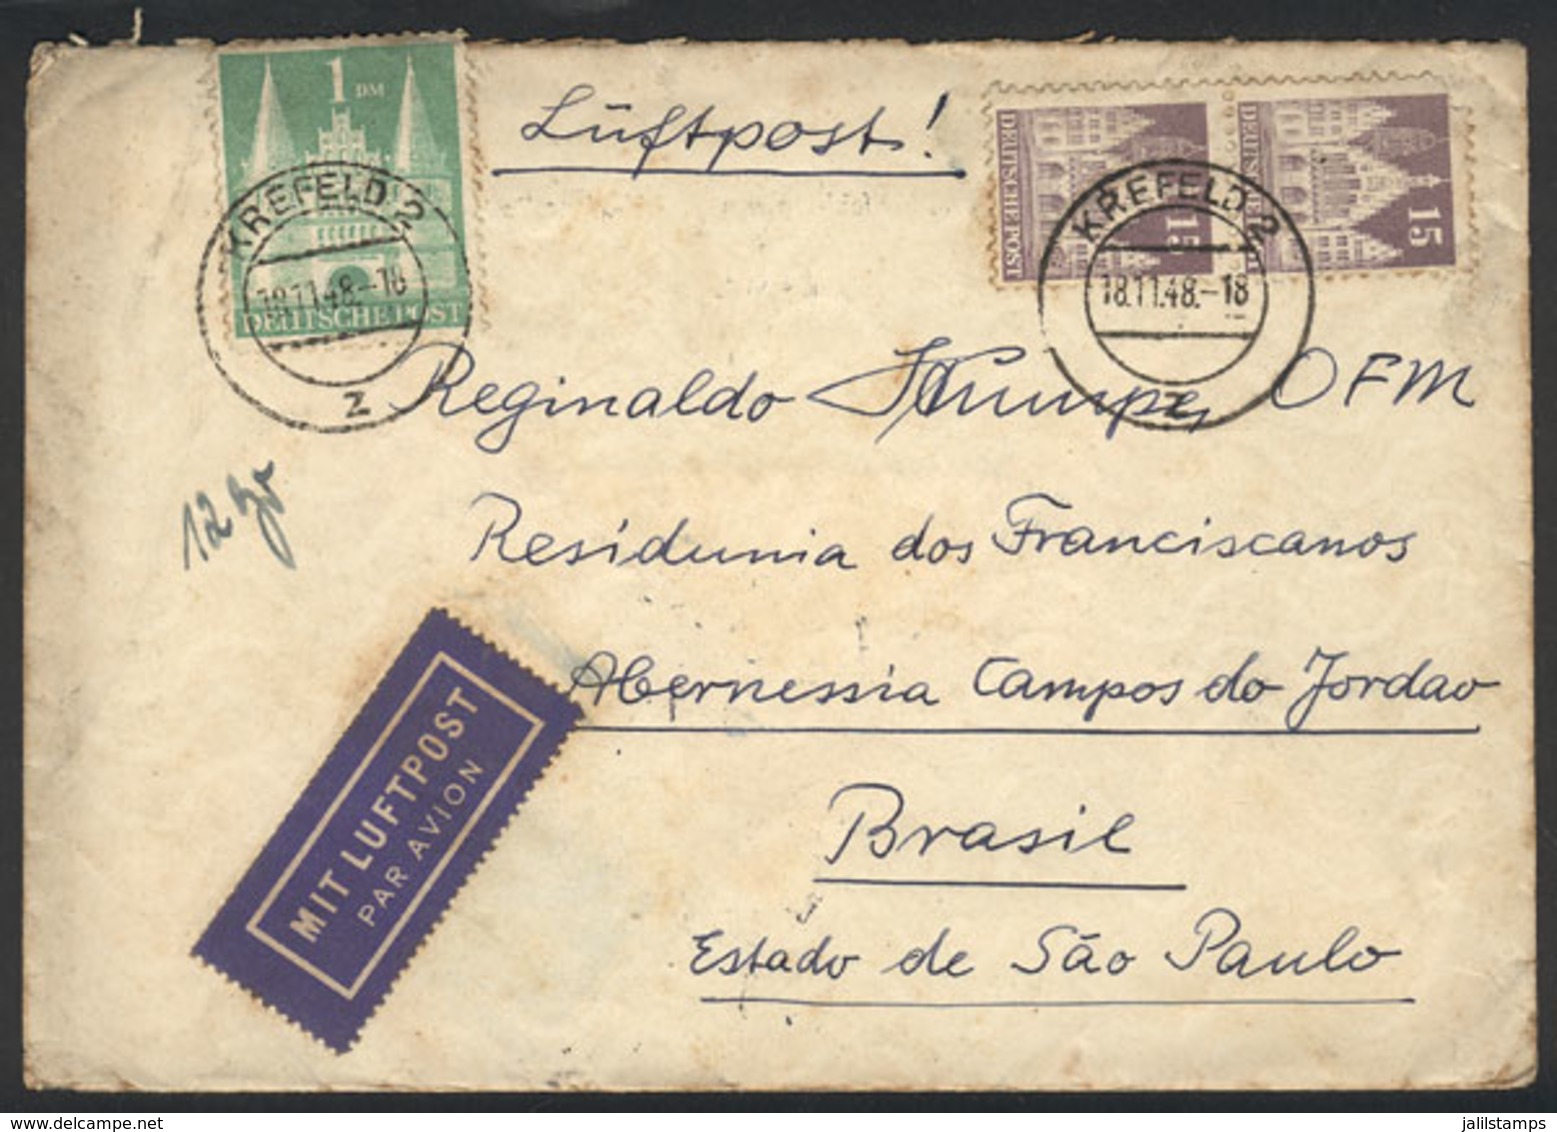 GERMANY: Airmail Cover Sent From Krefeld To Brazil On 18/NO/1948 Franked With 1.30Dm., Interesting! - Vorphilatelie